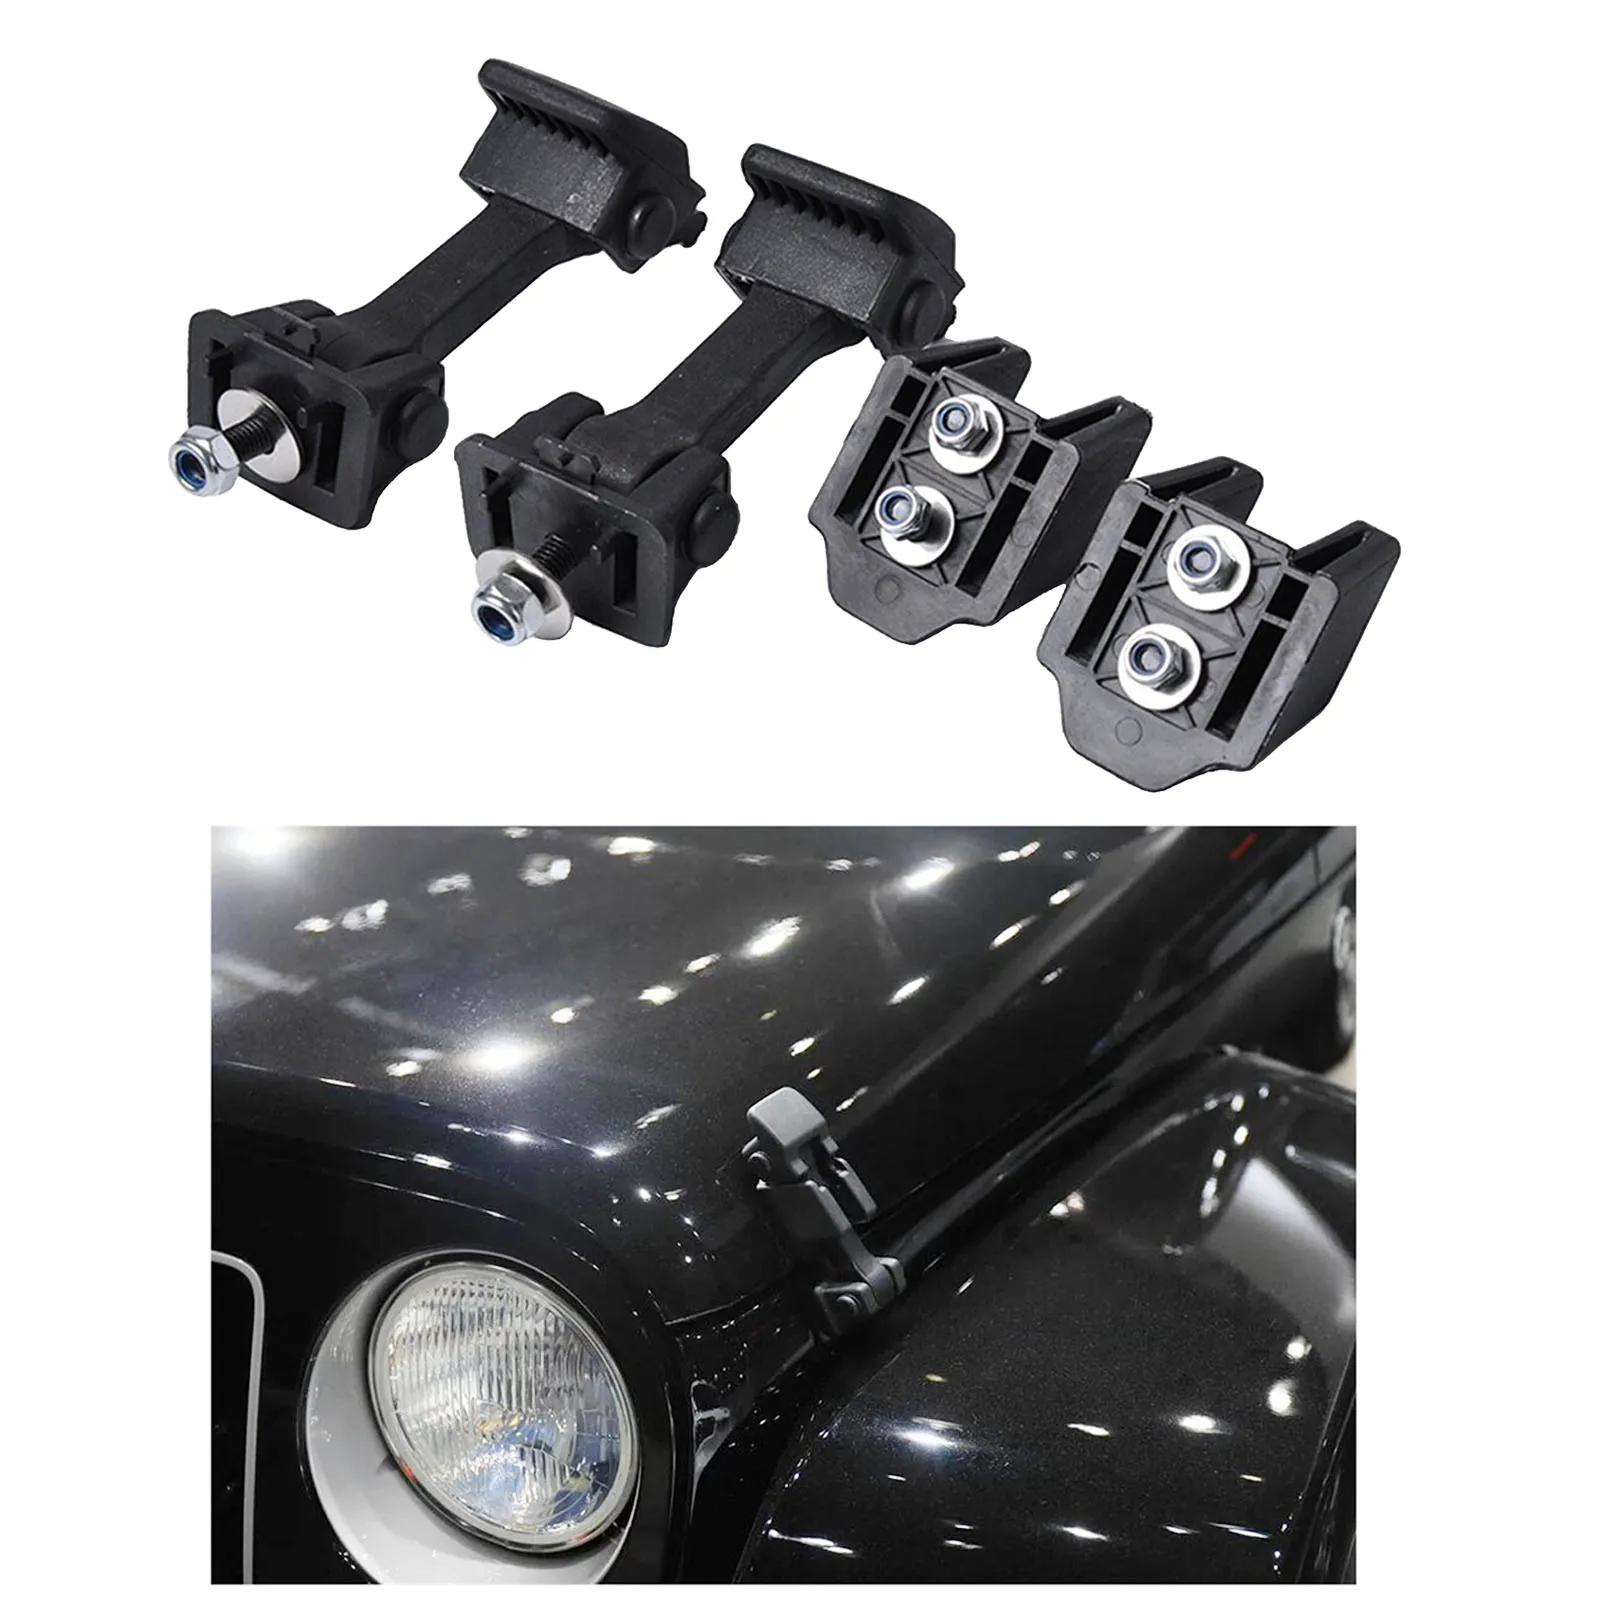 2 Set Hood Latches Catch Release Kit Locking Hood for Jeep for Wrangler for JK 2007-2016 Accessories Parts Black